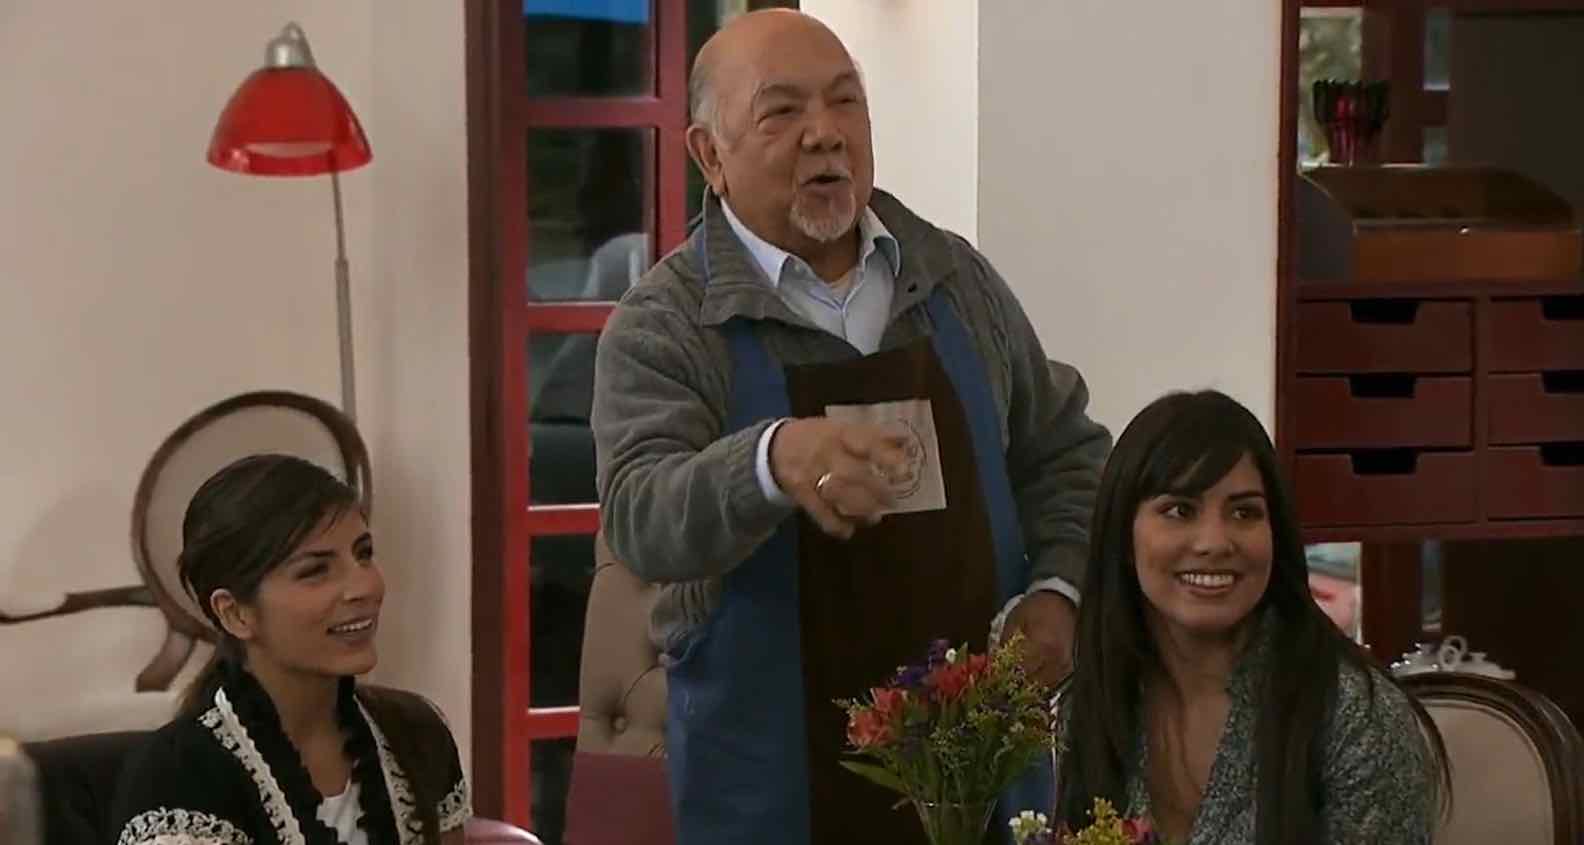 If telenovelas feel like a lot to watch, there are other strong Mexican dramas with less tropes. Try out 'Como Dice el Dicho' to begin your journey.